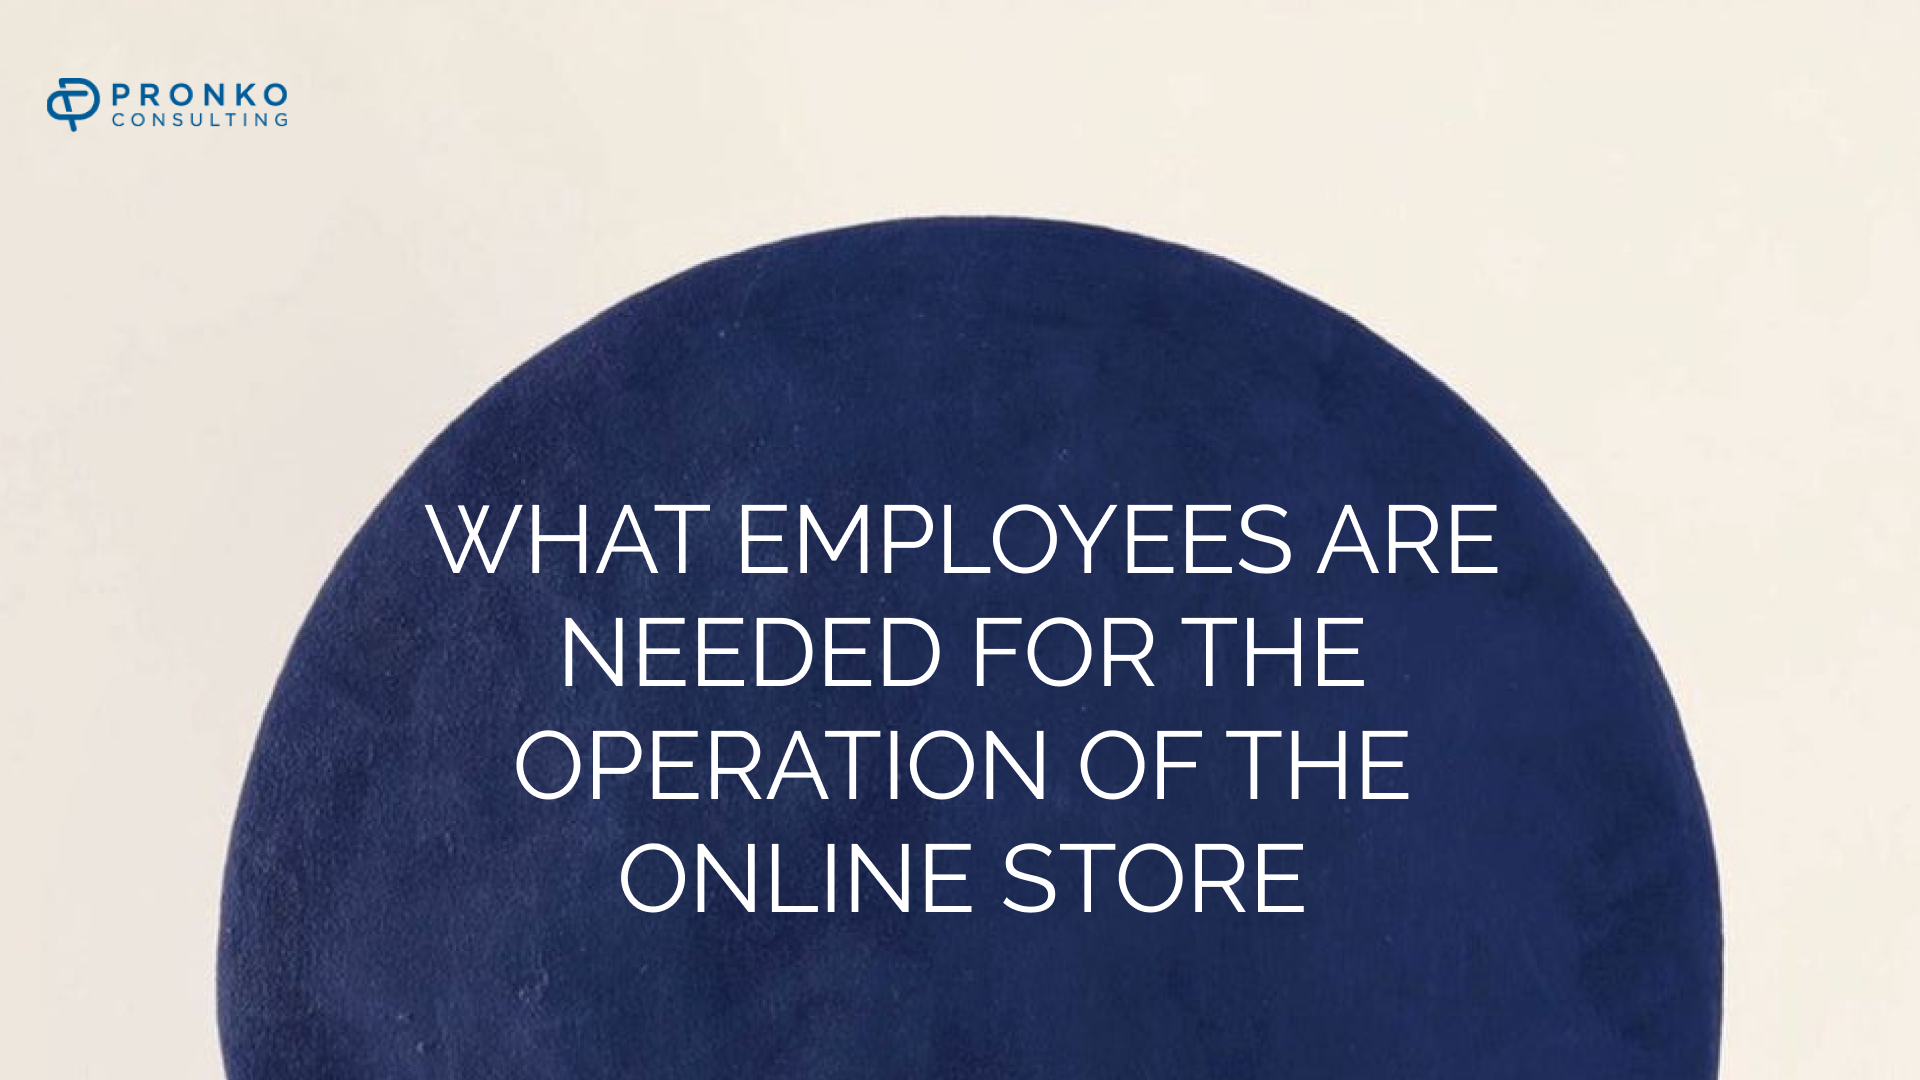 What employees are needed for the operation of the online store